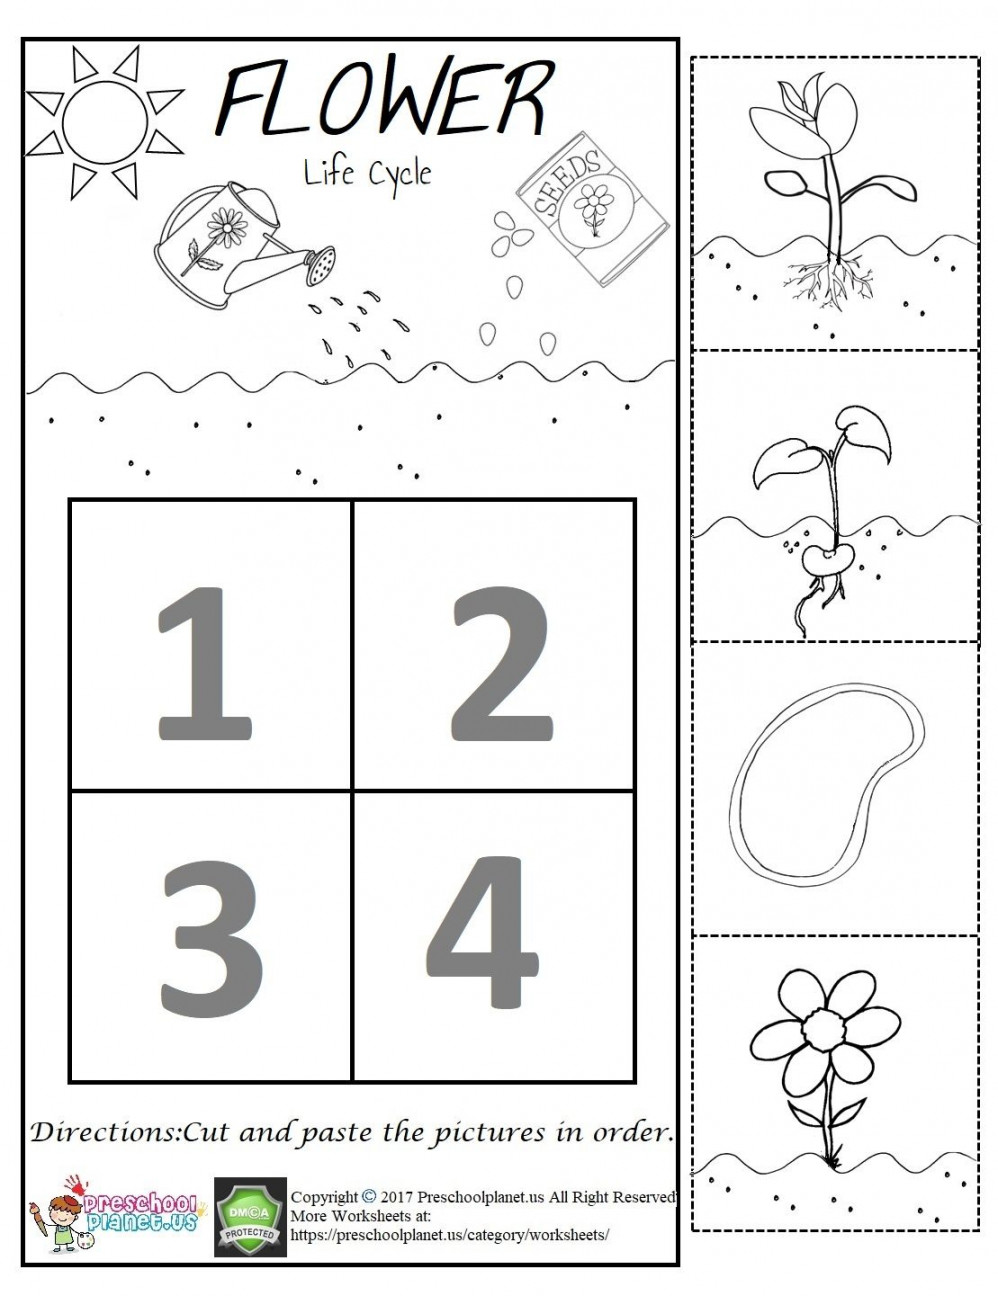 Flower Life Cycle Worksheet  Flower life cycle, Plant life cycle